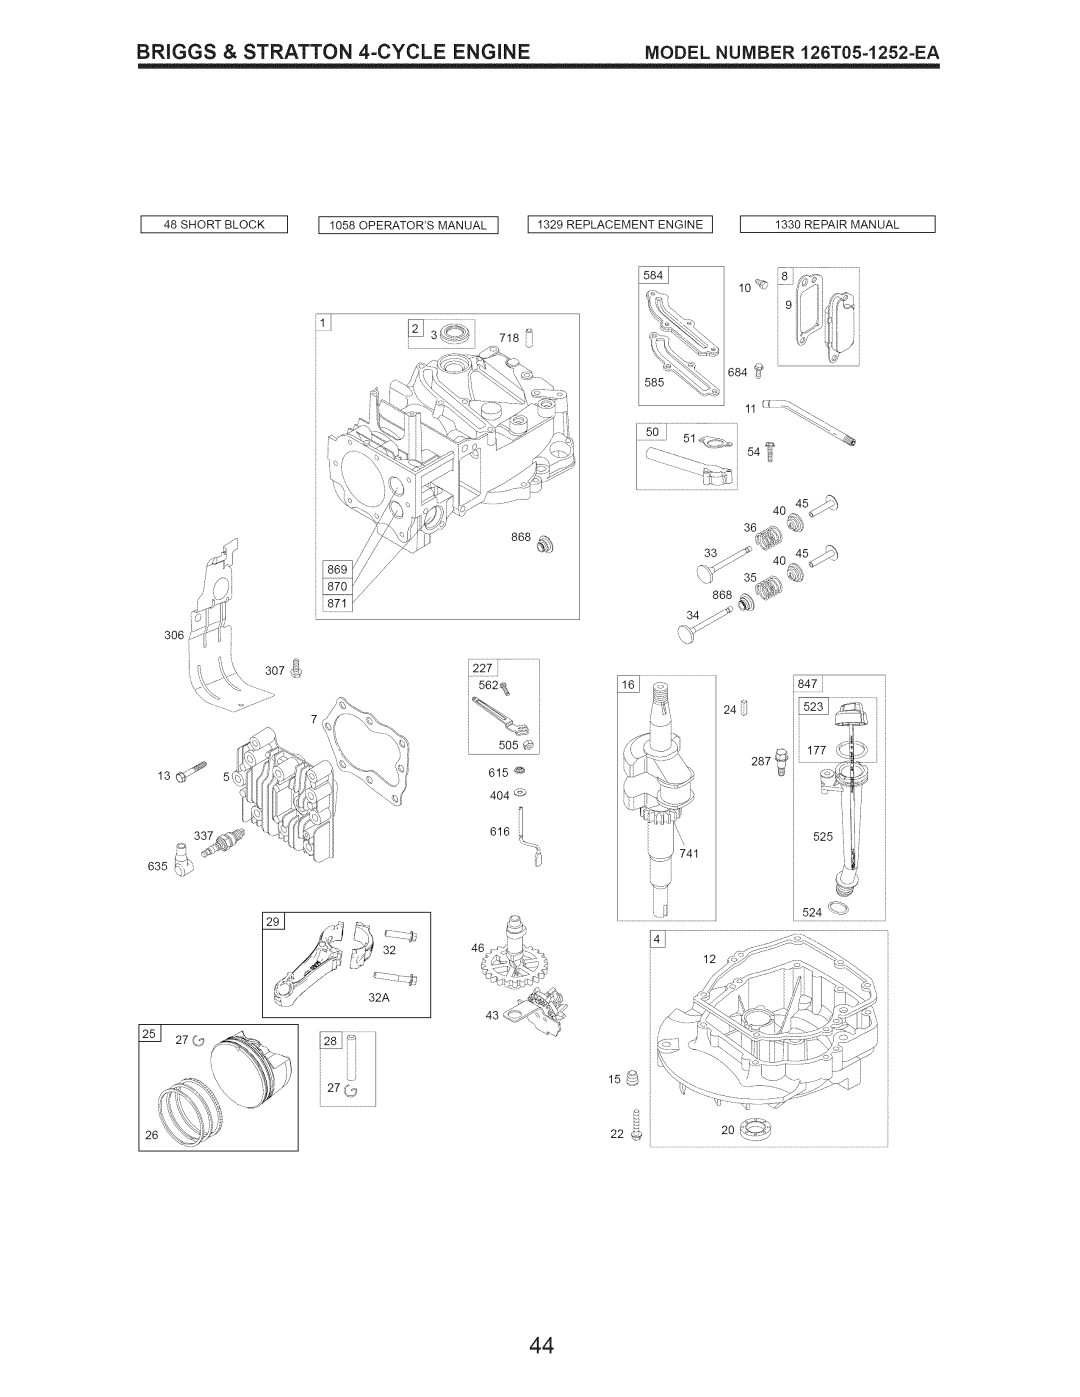 Craftsman 917.376530 owner manual BRIGGS & STRATTON 4-CYCLEENGINE, MODEL NUMBER 126T05-1252=EA 